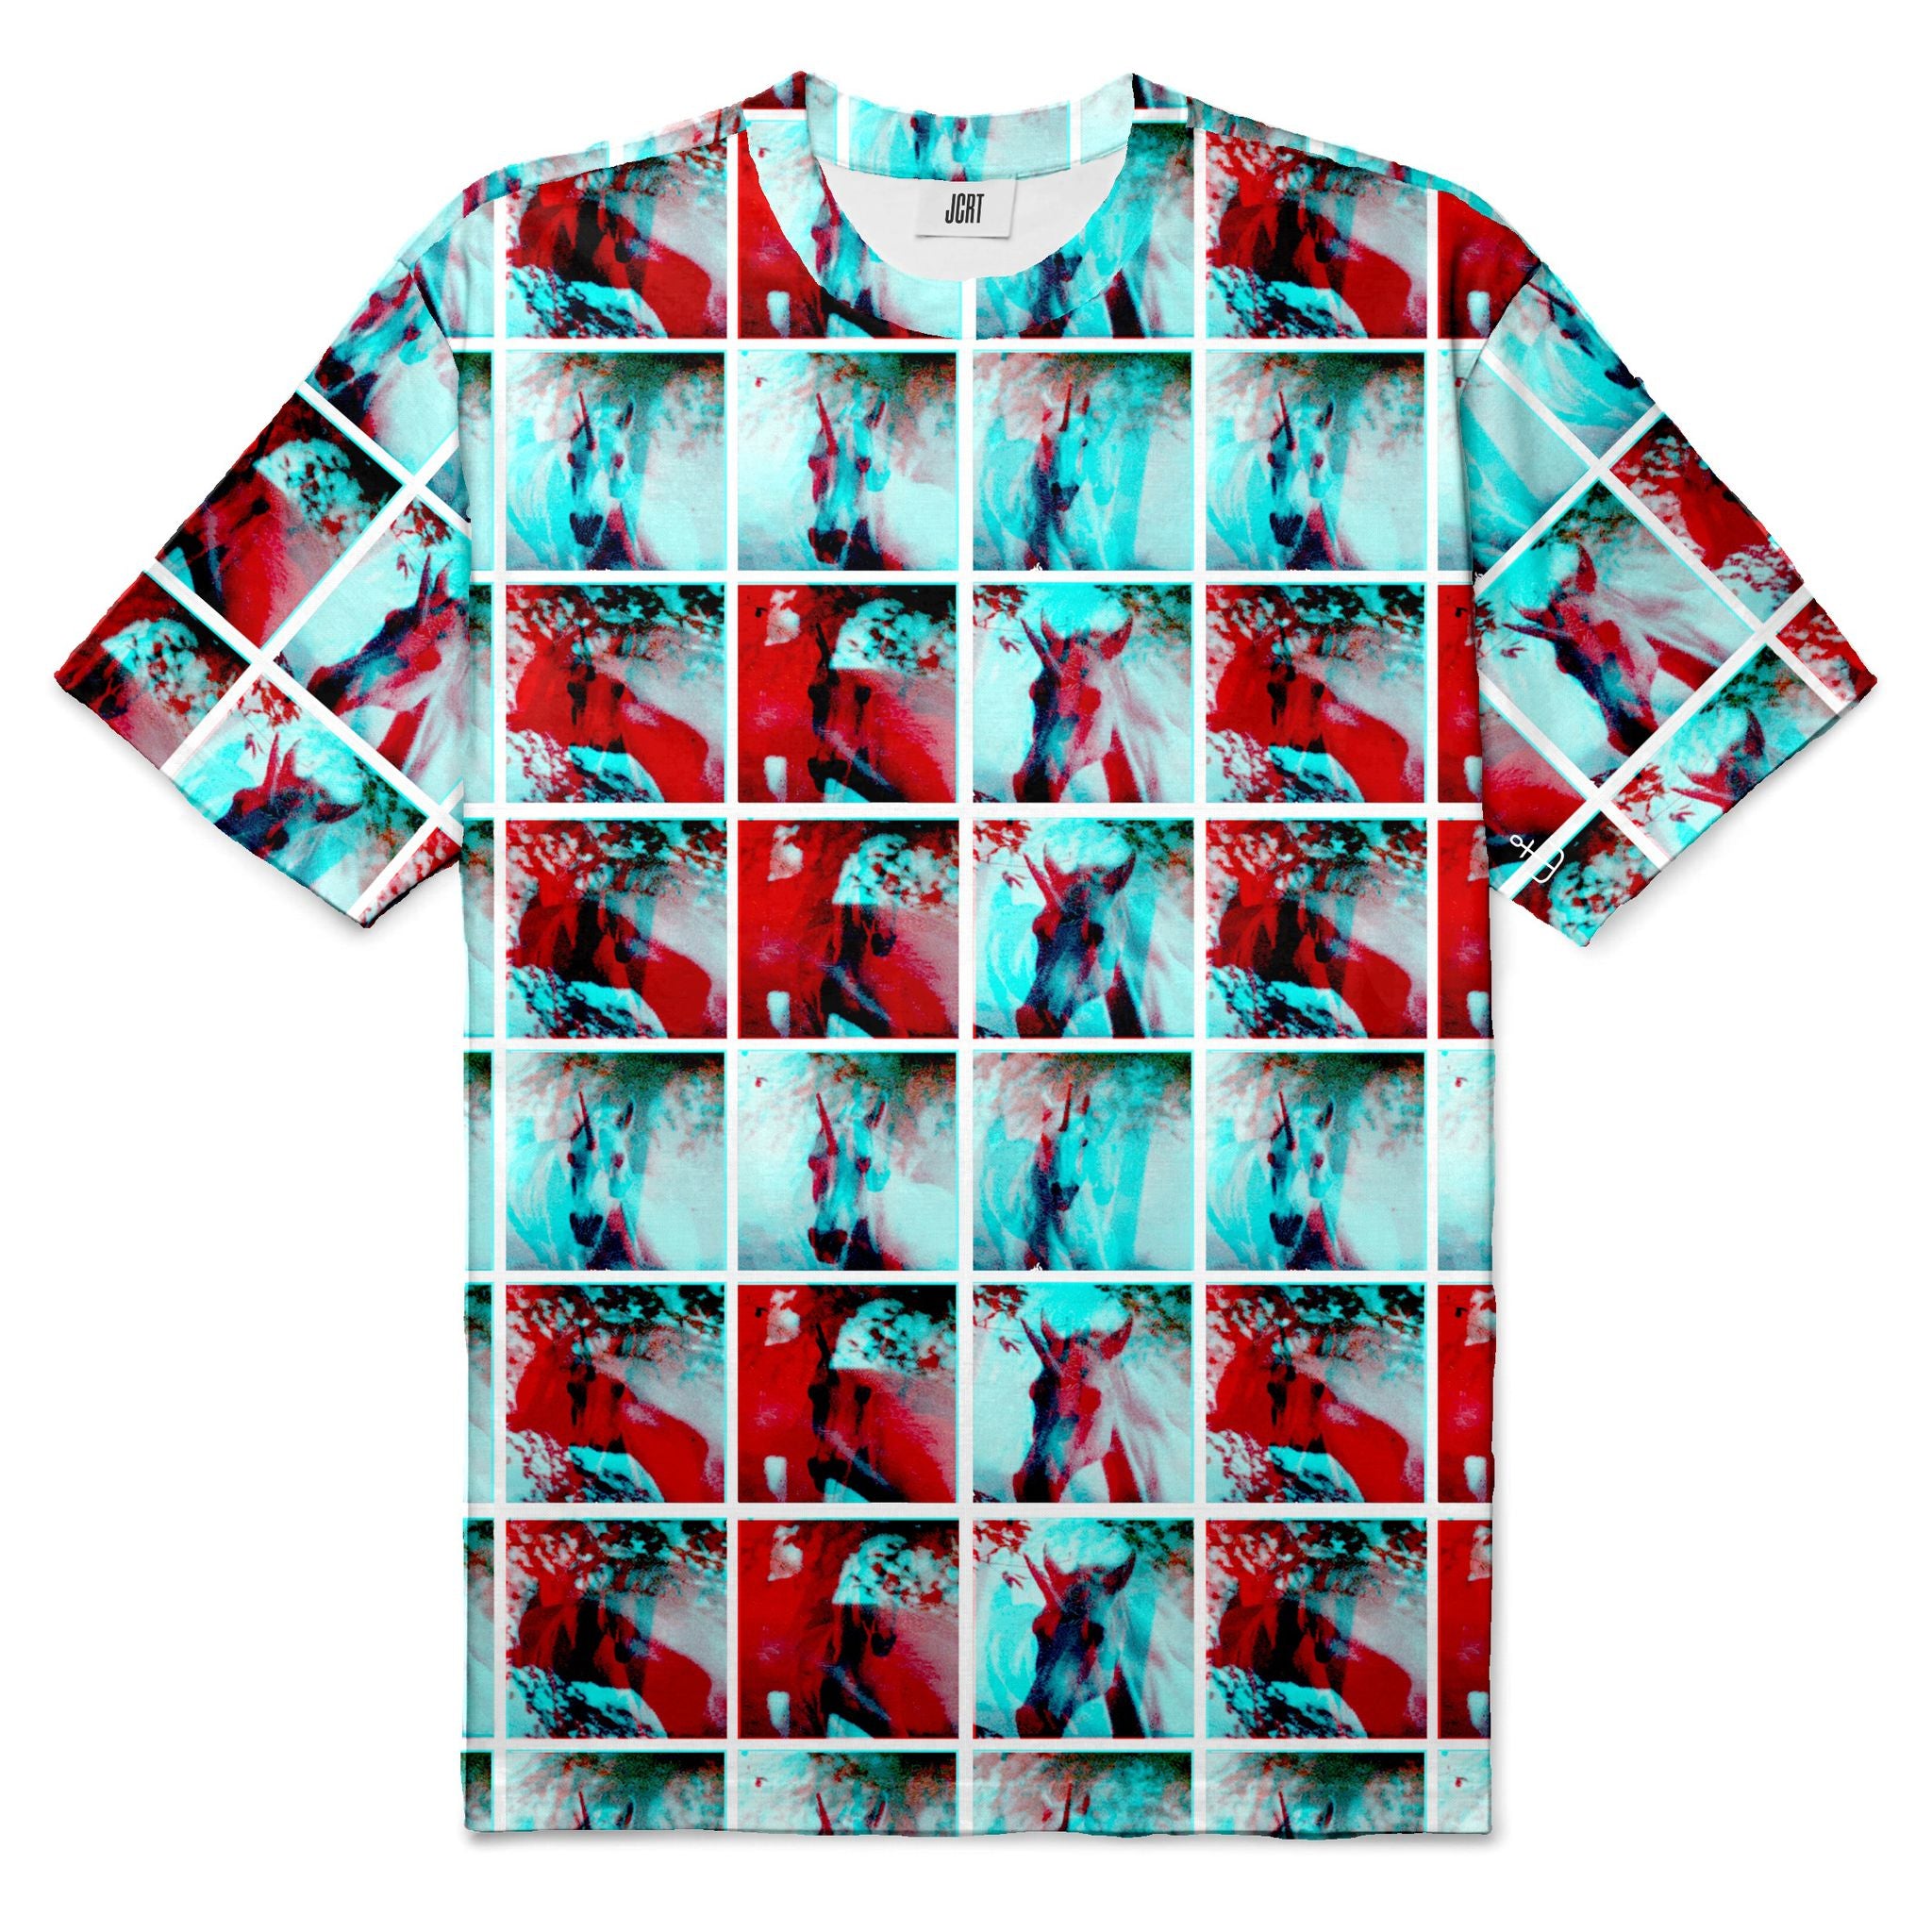 The But Then Again Who Does Grid T-Shirt